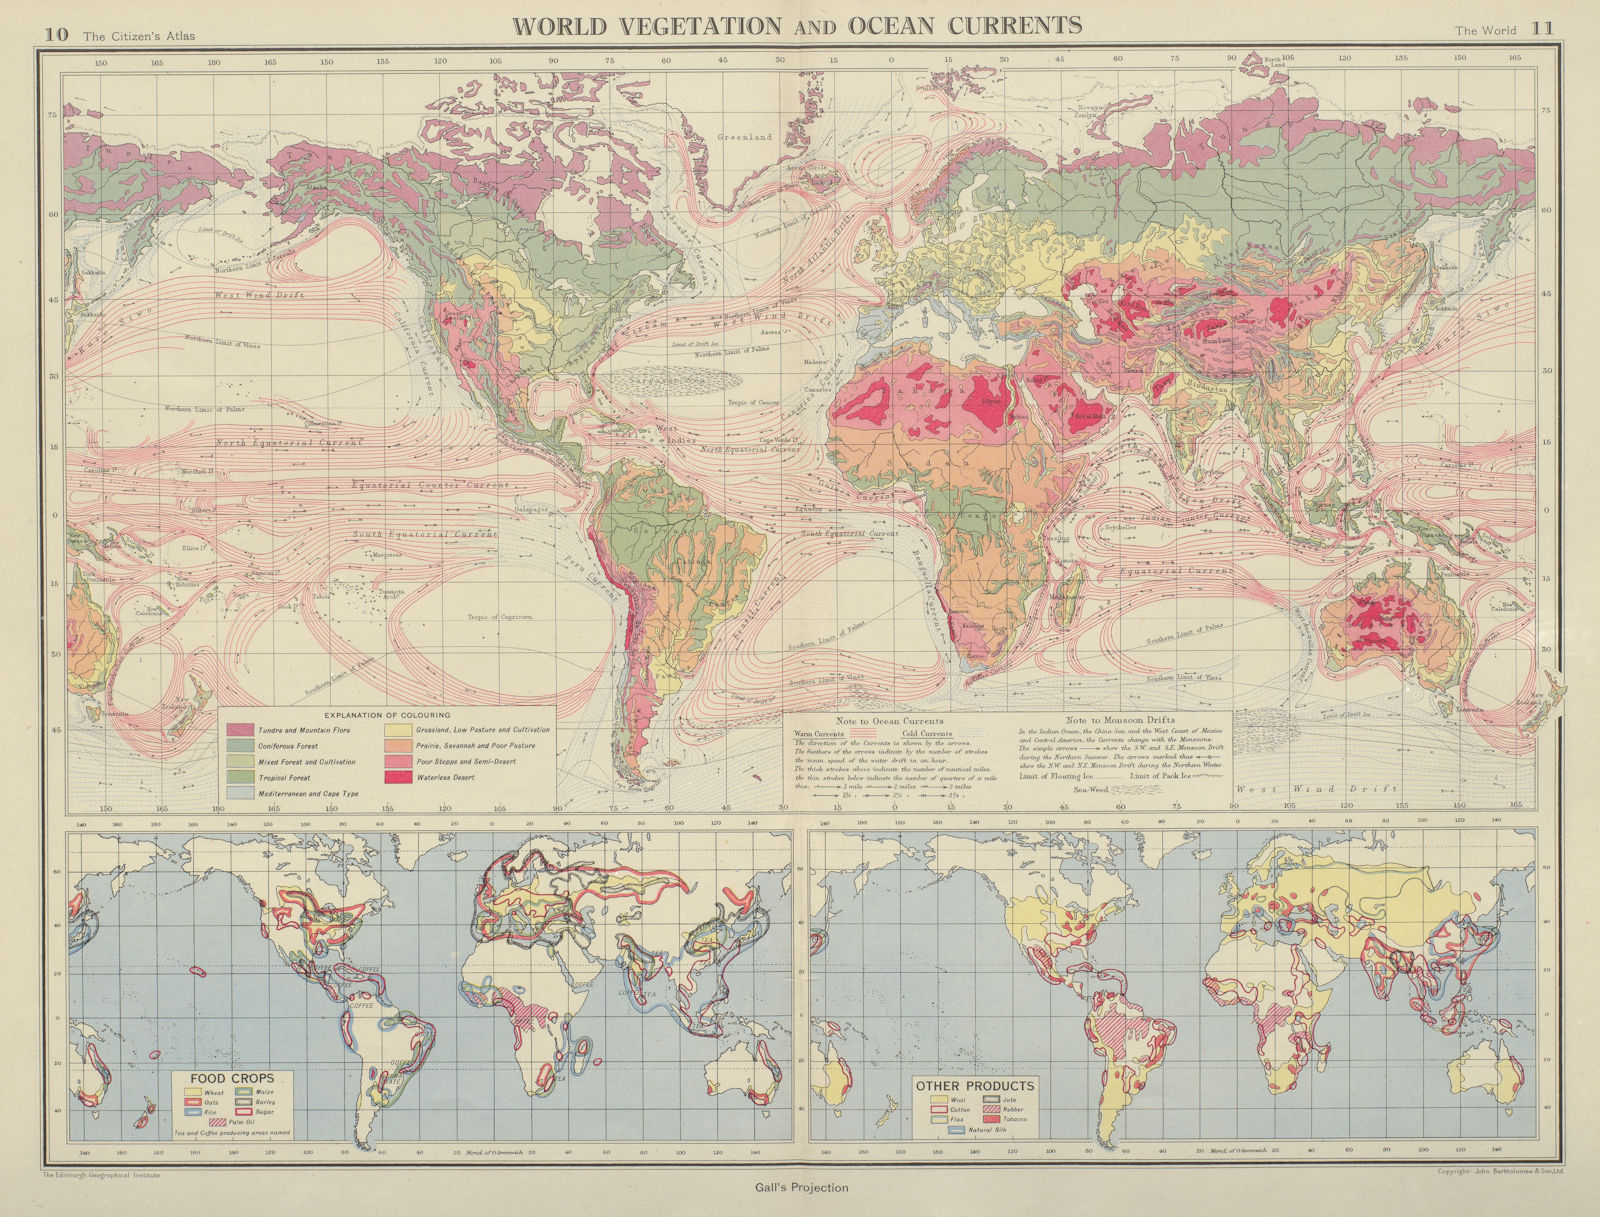 WORLD. Vegetation. Ocean Currents. Food crops. Agricultural commodities 1947 map